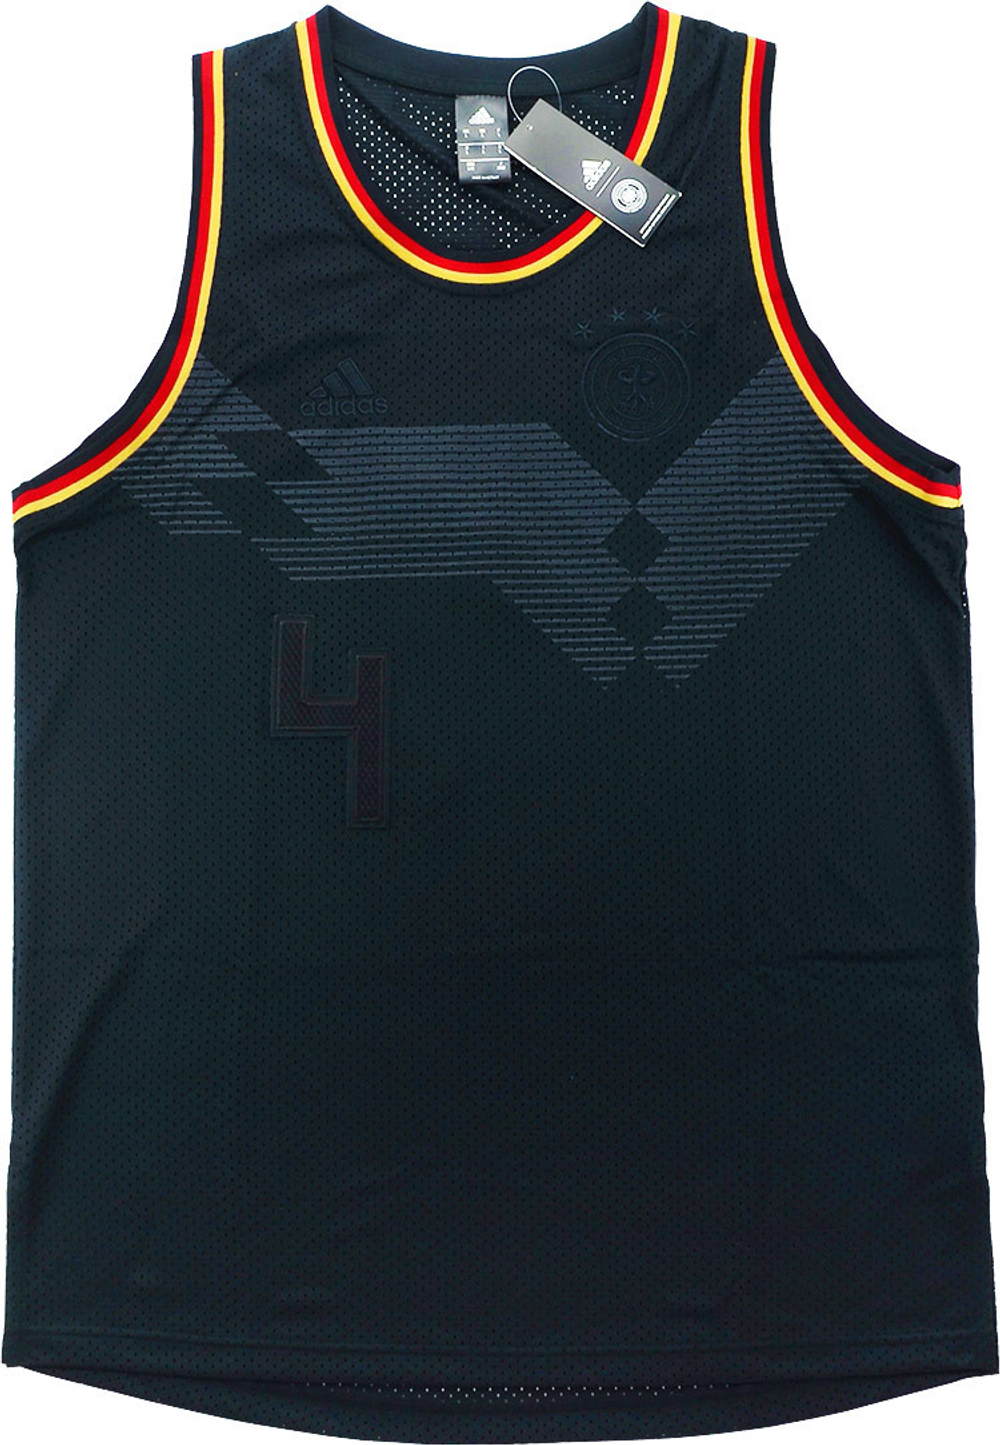 2018-19 Germany Adidas Seasonal Special Tank Top/Vest *BNIB*-Germany Featured Products View All Clearance Training Best Sellers Permanent Price Drops Euro 2020